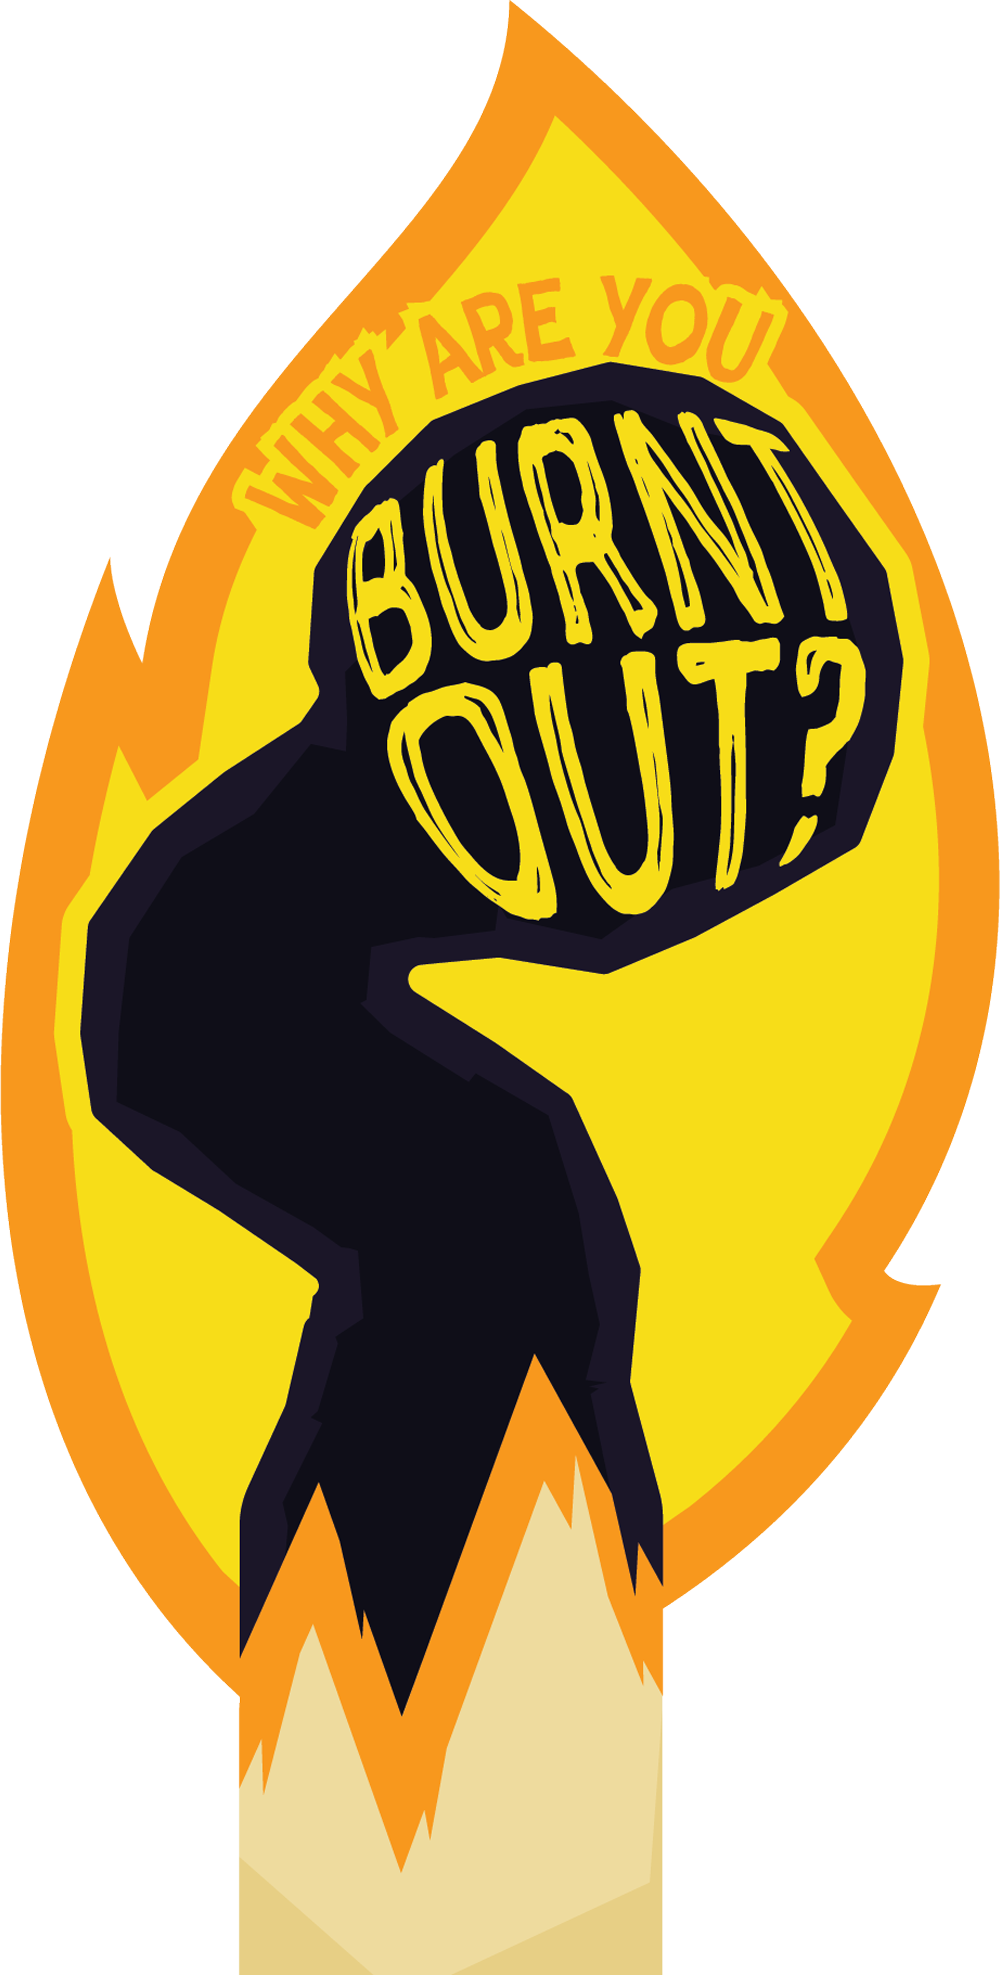 Why Are You Burnt Out? typography stylized over the tip of a burning match